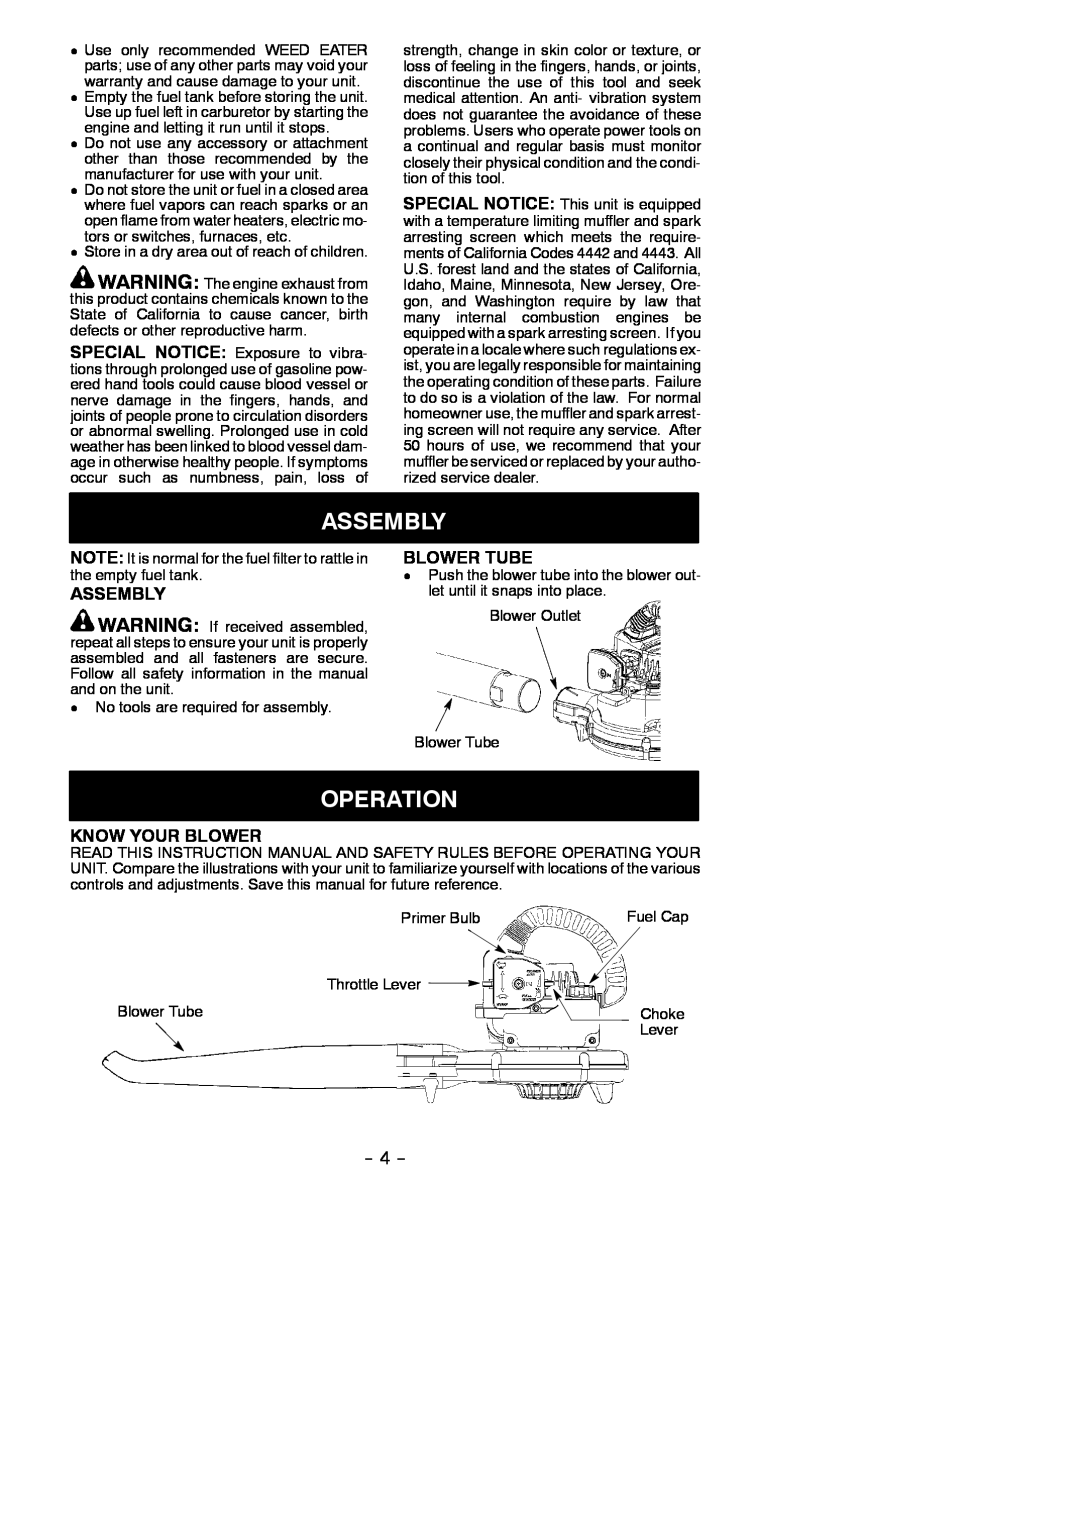 Weed Eater 545186783 instruction manual Assembly, Operation, Blower Tube, Know Your Blower 